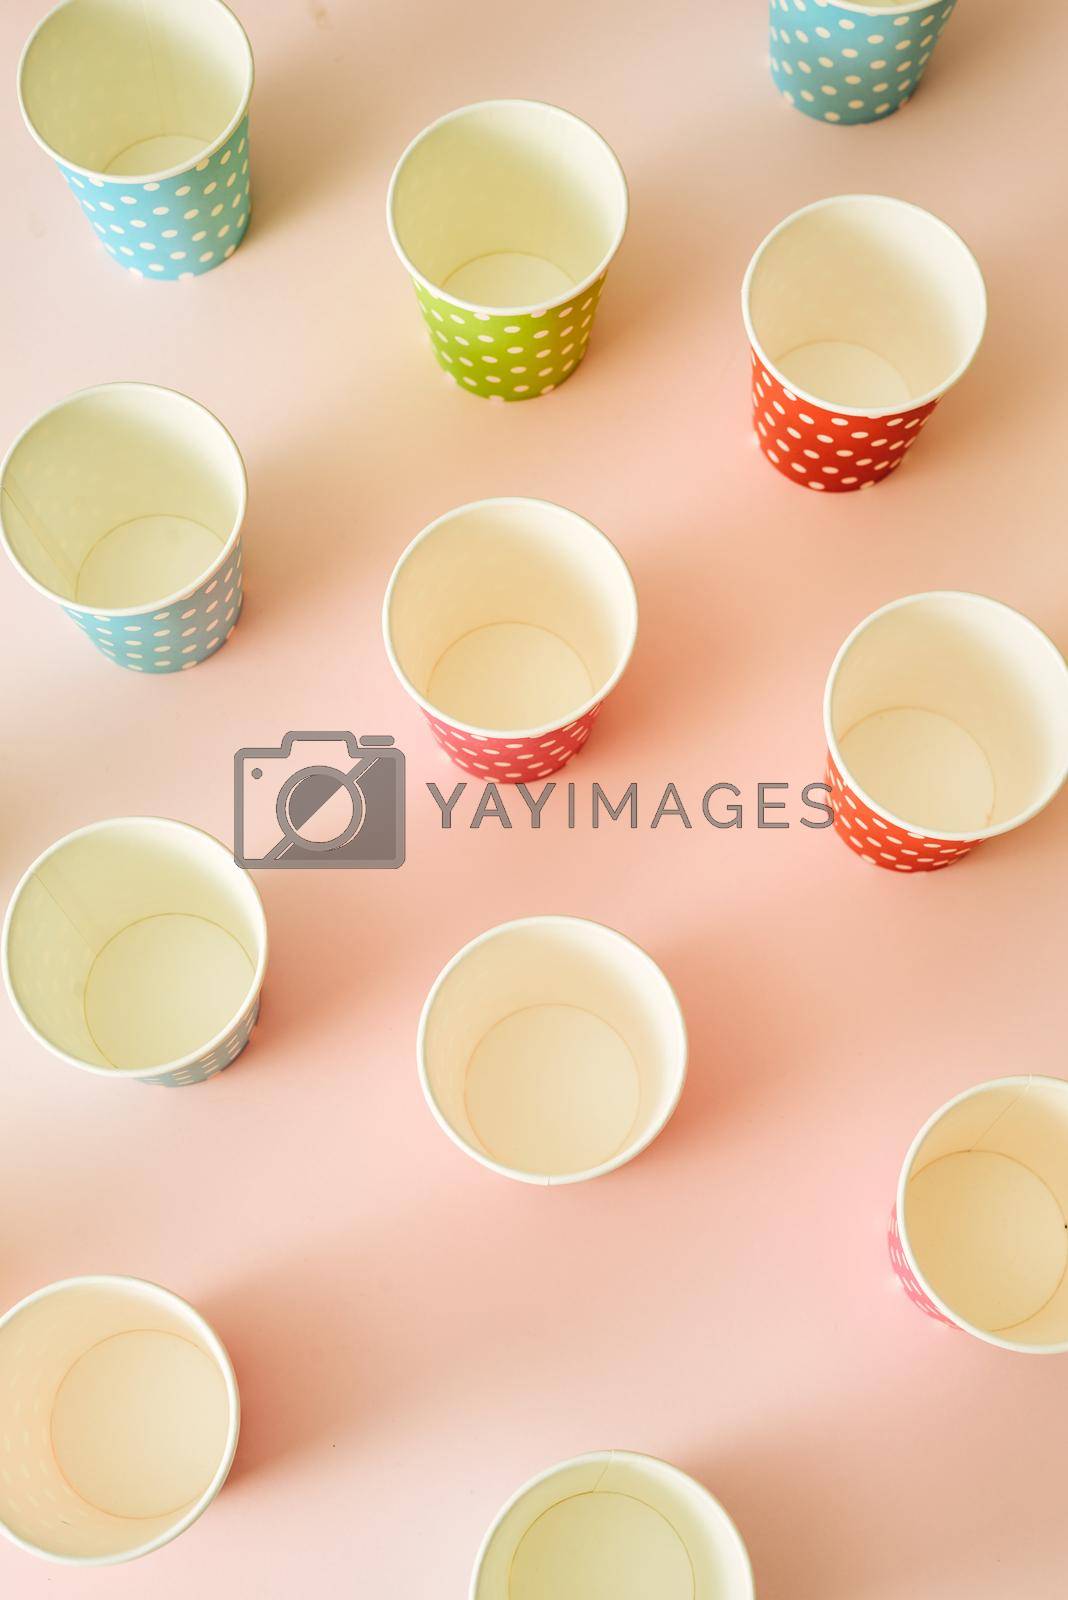 paper fashion cups on a delicate pink background